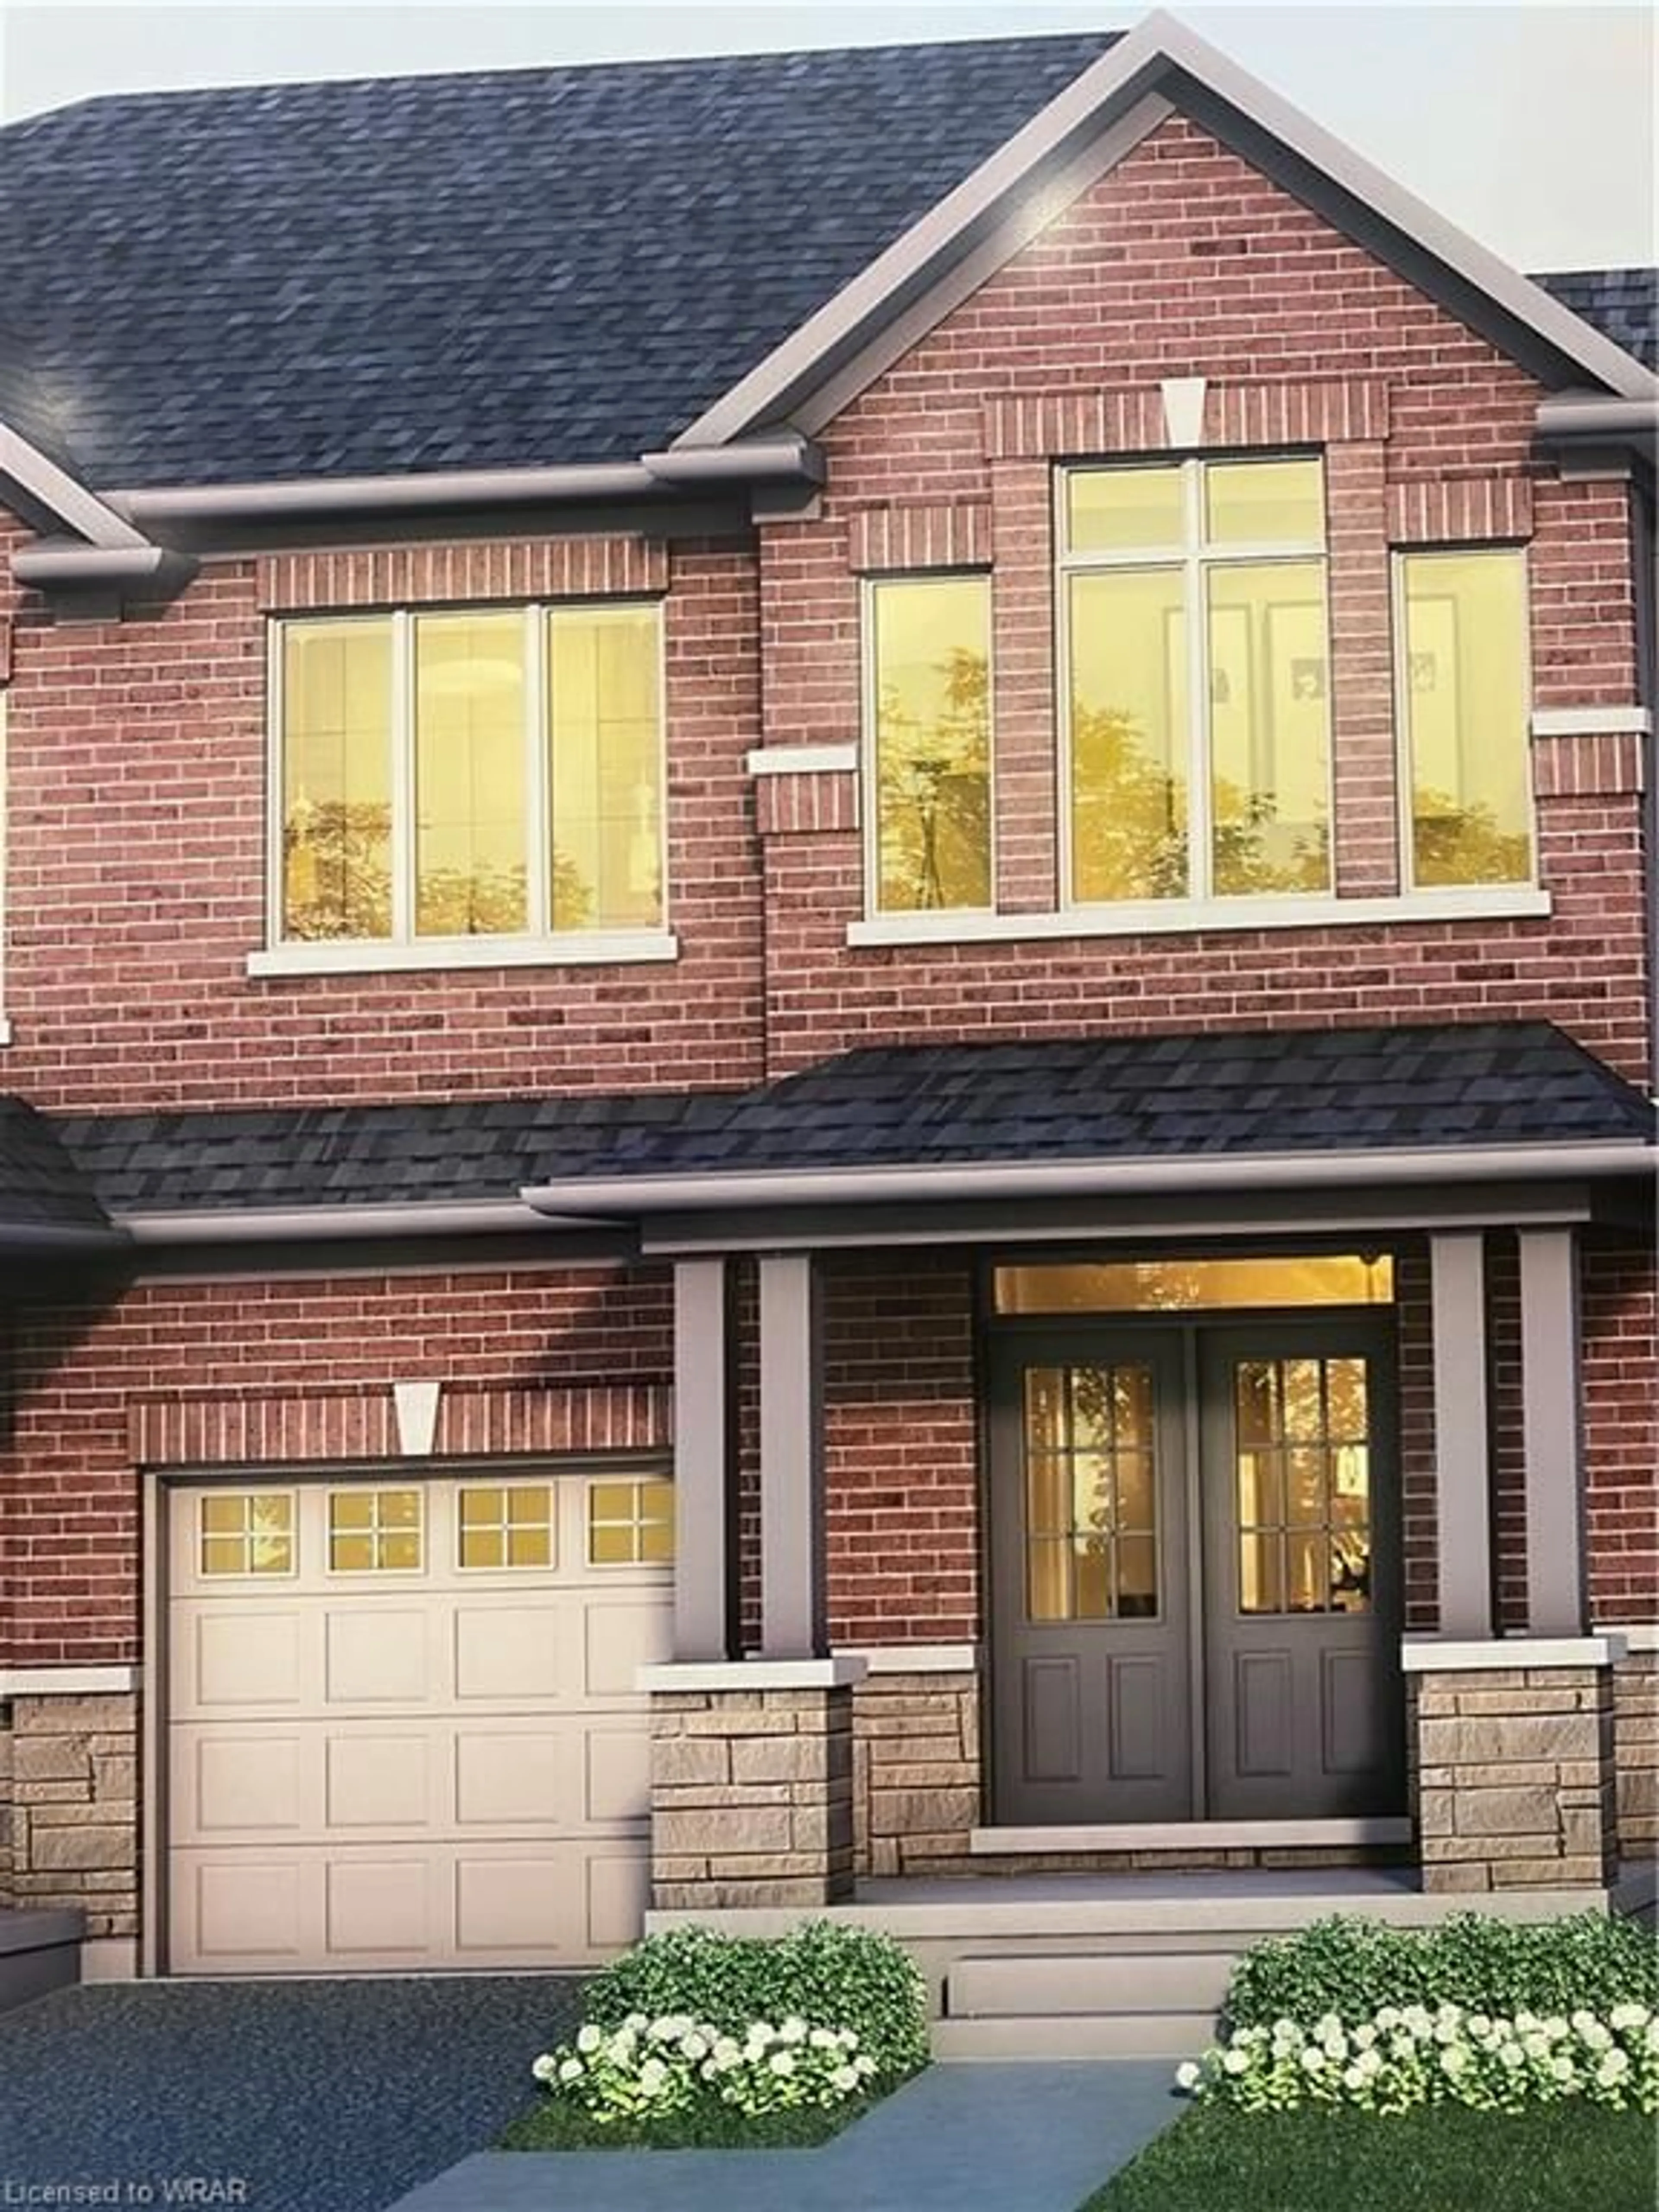 Home with brick exterior material for LOT 37 Robert Woolner St, Ayr Ontario N0B 1E0